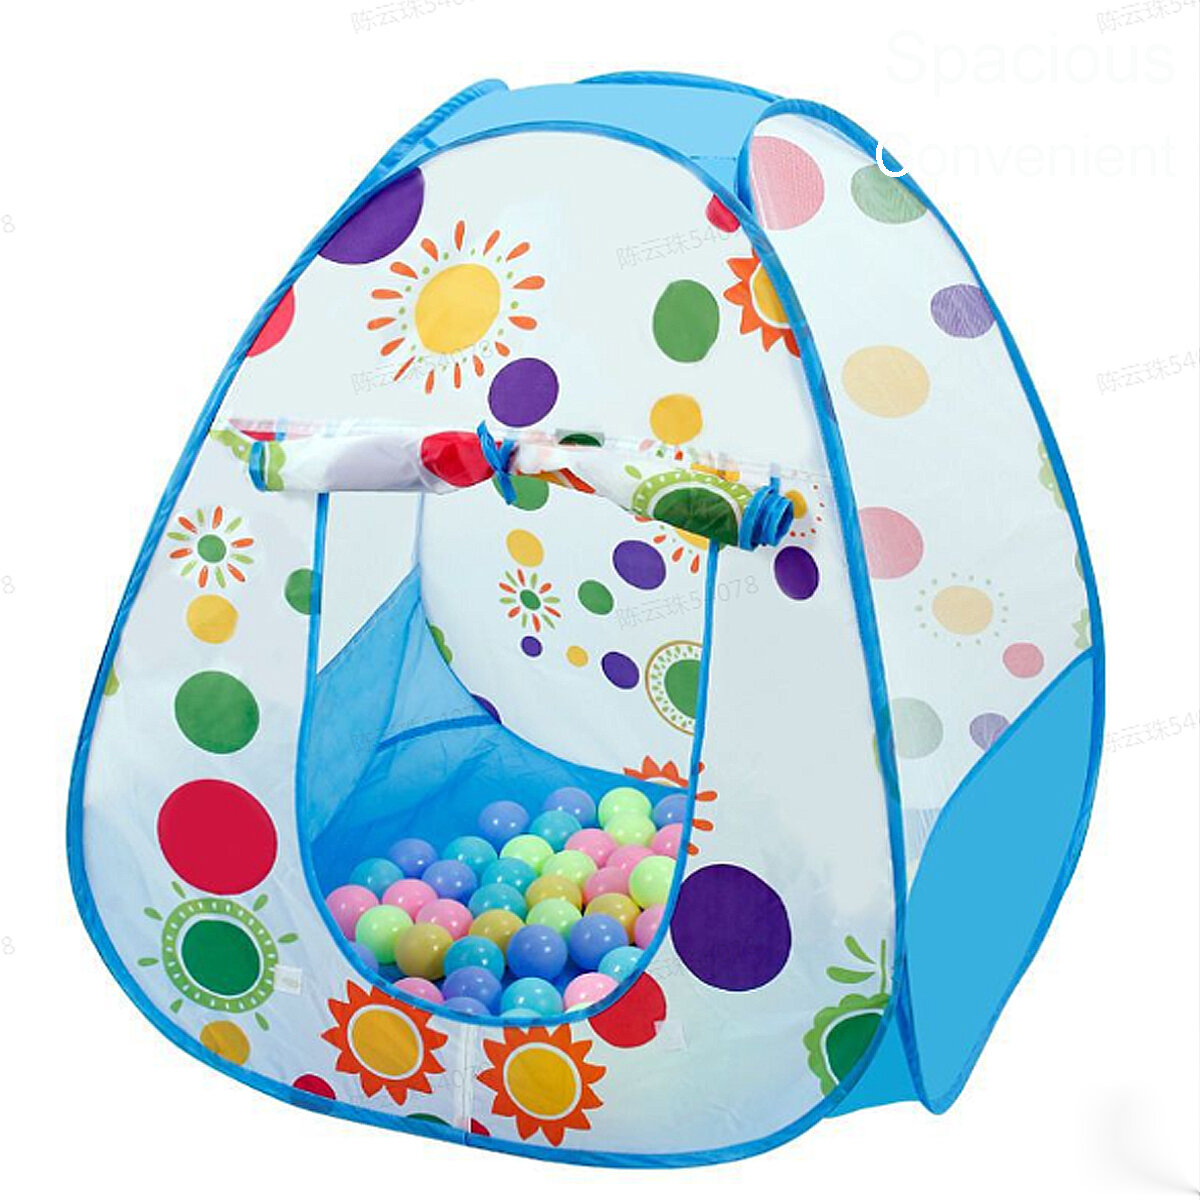 3 In1 Baby Tent Kid Crawling Tunnel Play Tent House Ball Pit Pool Tent for Children Toy Ball Pool Oc